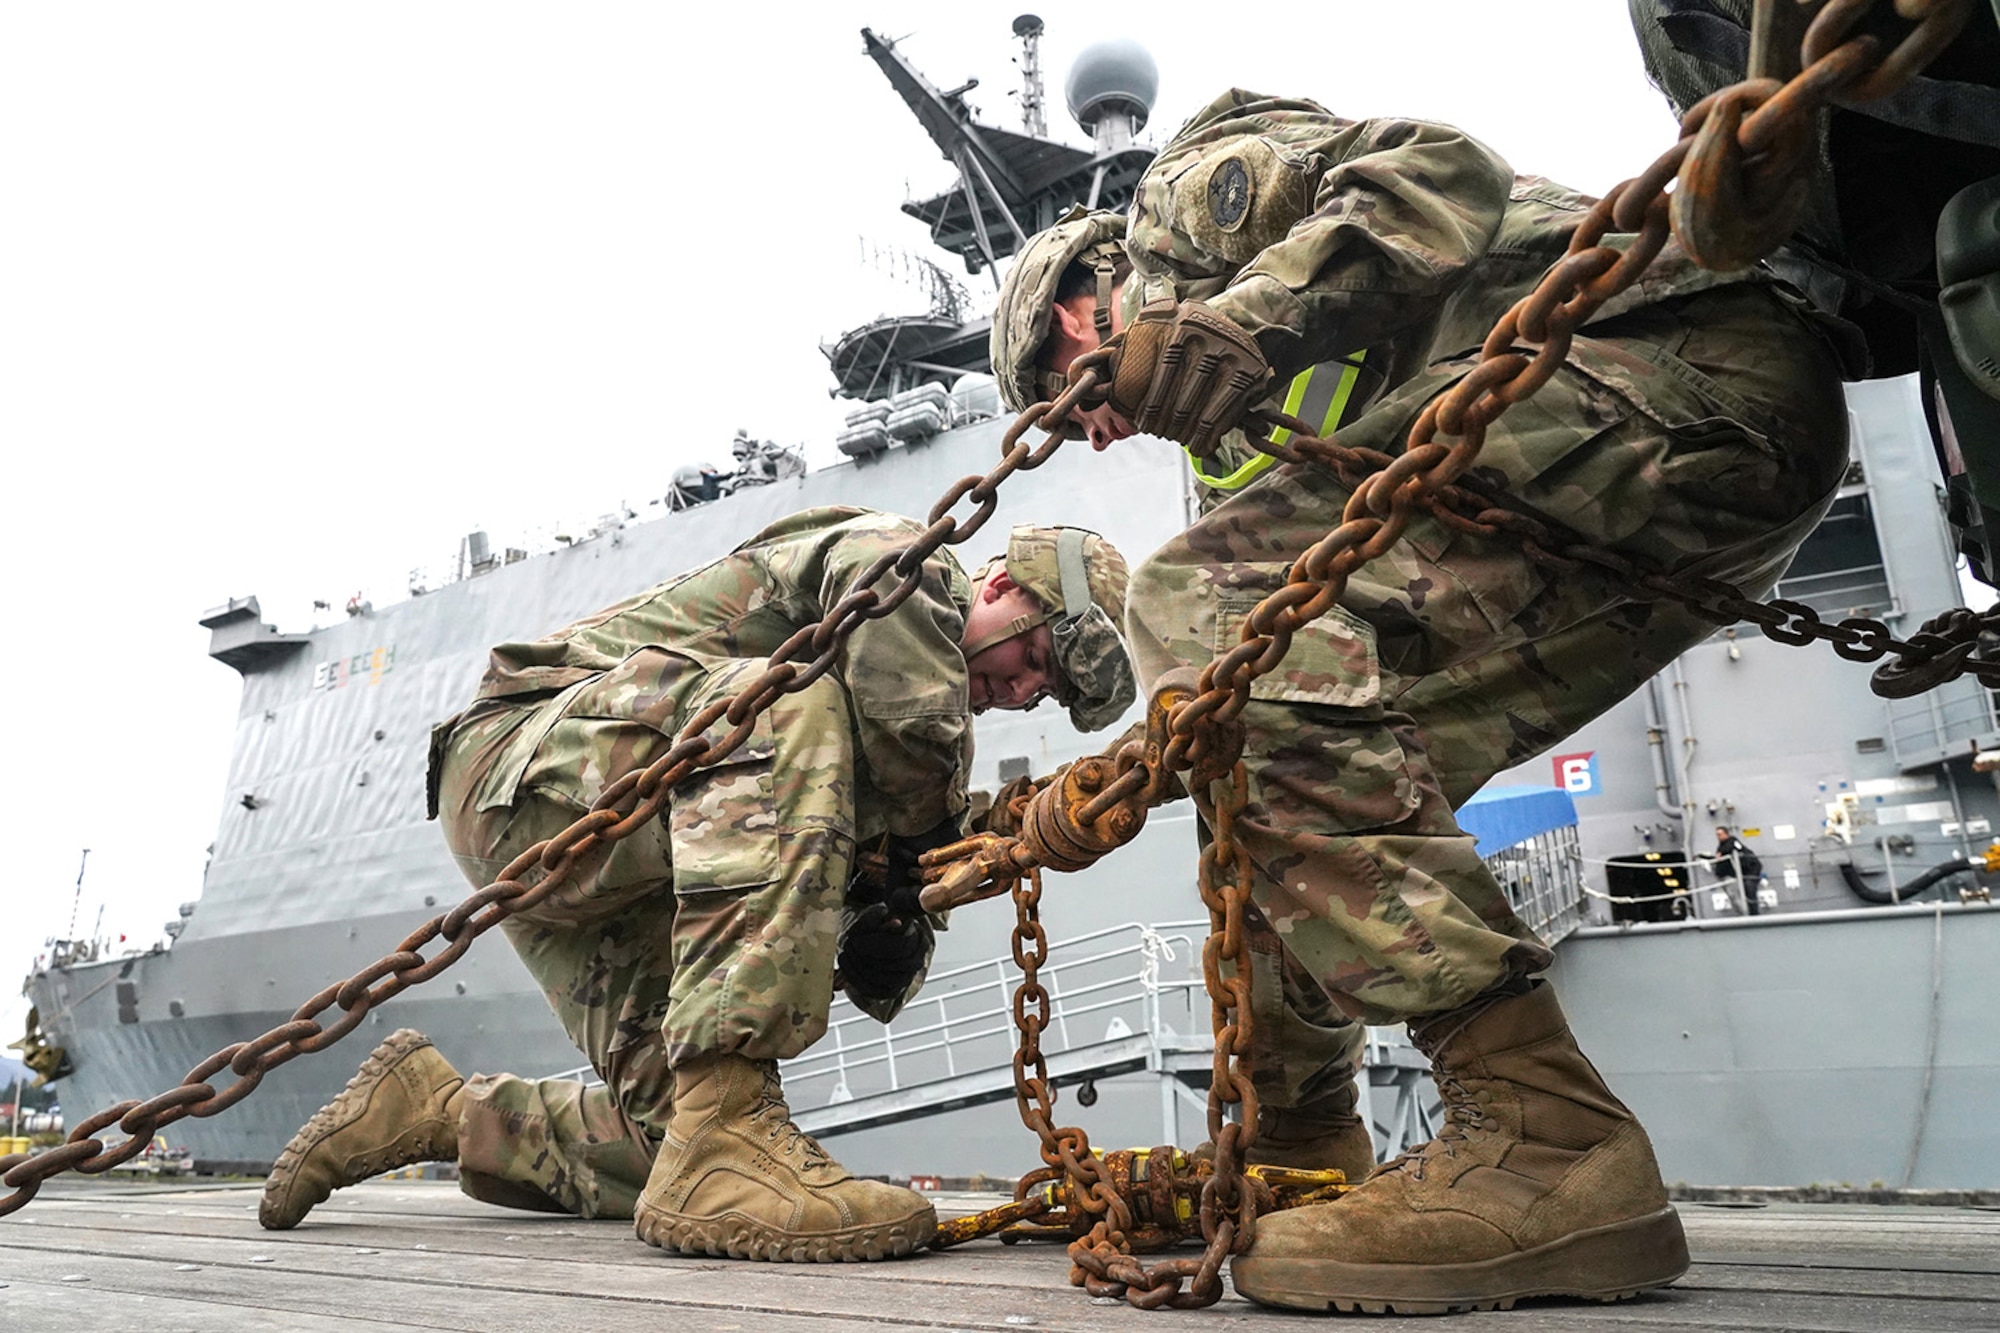 Army Sgt. Dylan Knigge, left, and Specialist Timothy Burns, both assigned to the 109th Transportation Company, 17th Combat Support Sustainment Battalion, U.S. Army Alaska, secure U.S. Marine Corps bulk fuel supplies and equipment from the U.S.S. Comstock (LSD-45), a Whidbey Island-class dock landing ship, to an M872 trailer at the port of Seward, Alaska, Sept. 19, 2019, for transport to Joint Base Elmendorf-Richardson, Alaska. The U.S. Navy is conducting an Arctic Expeditionary Capabilities Exercise to test its logistical effectiveness and joint-service interoperability while responding to conflict or disaster in an austere environment with no organic assets.